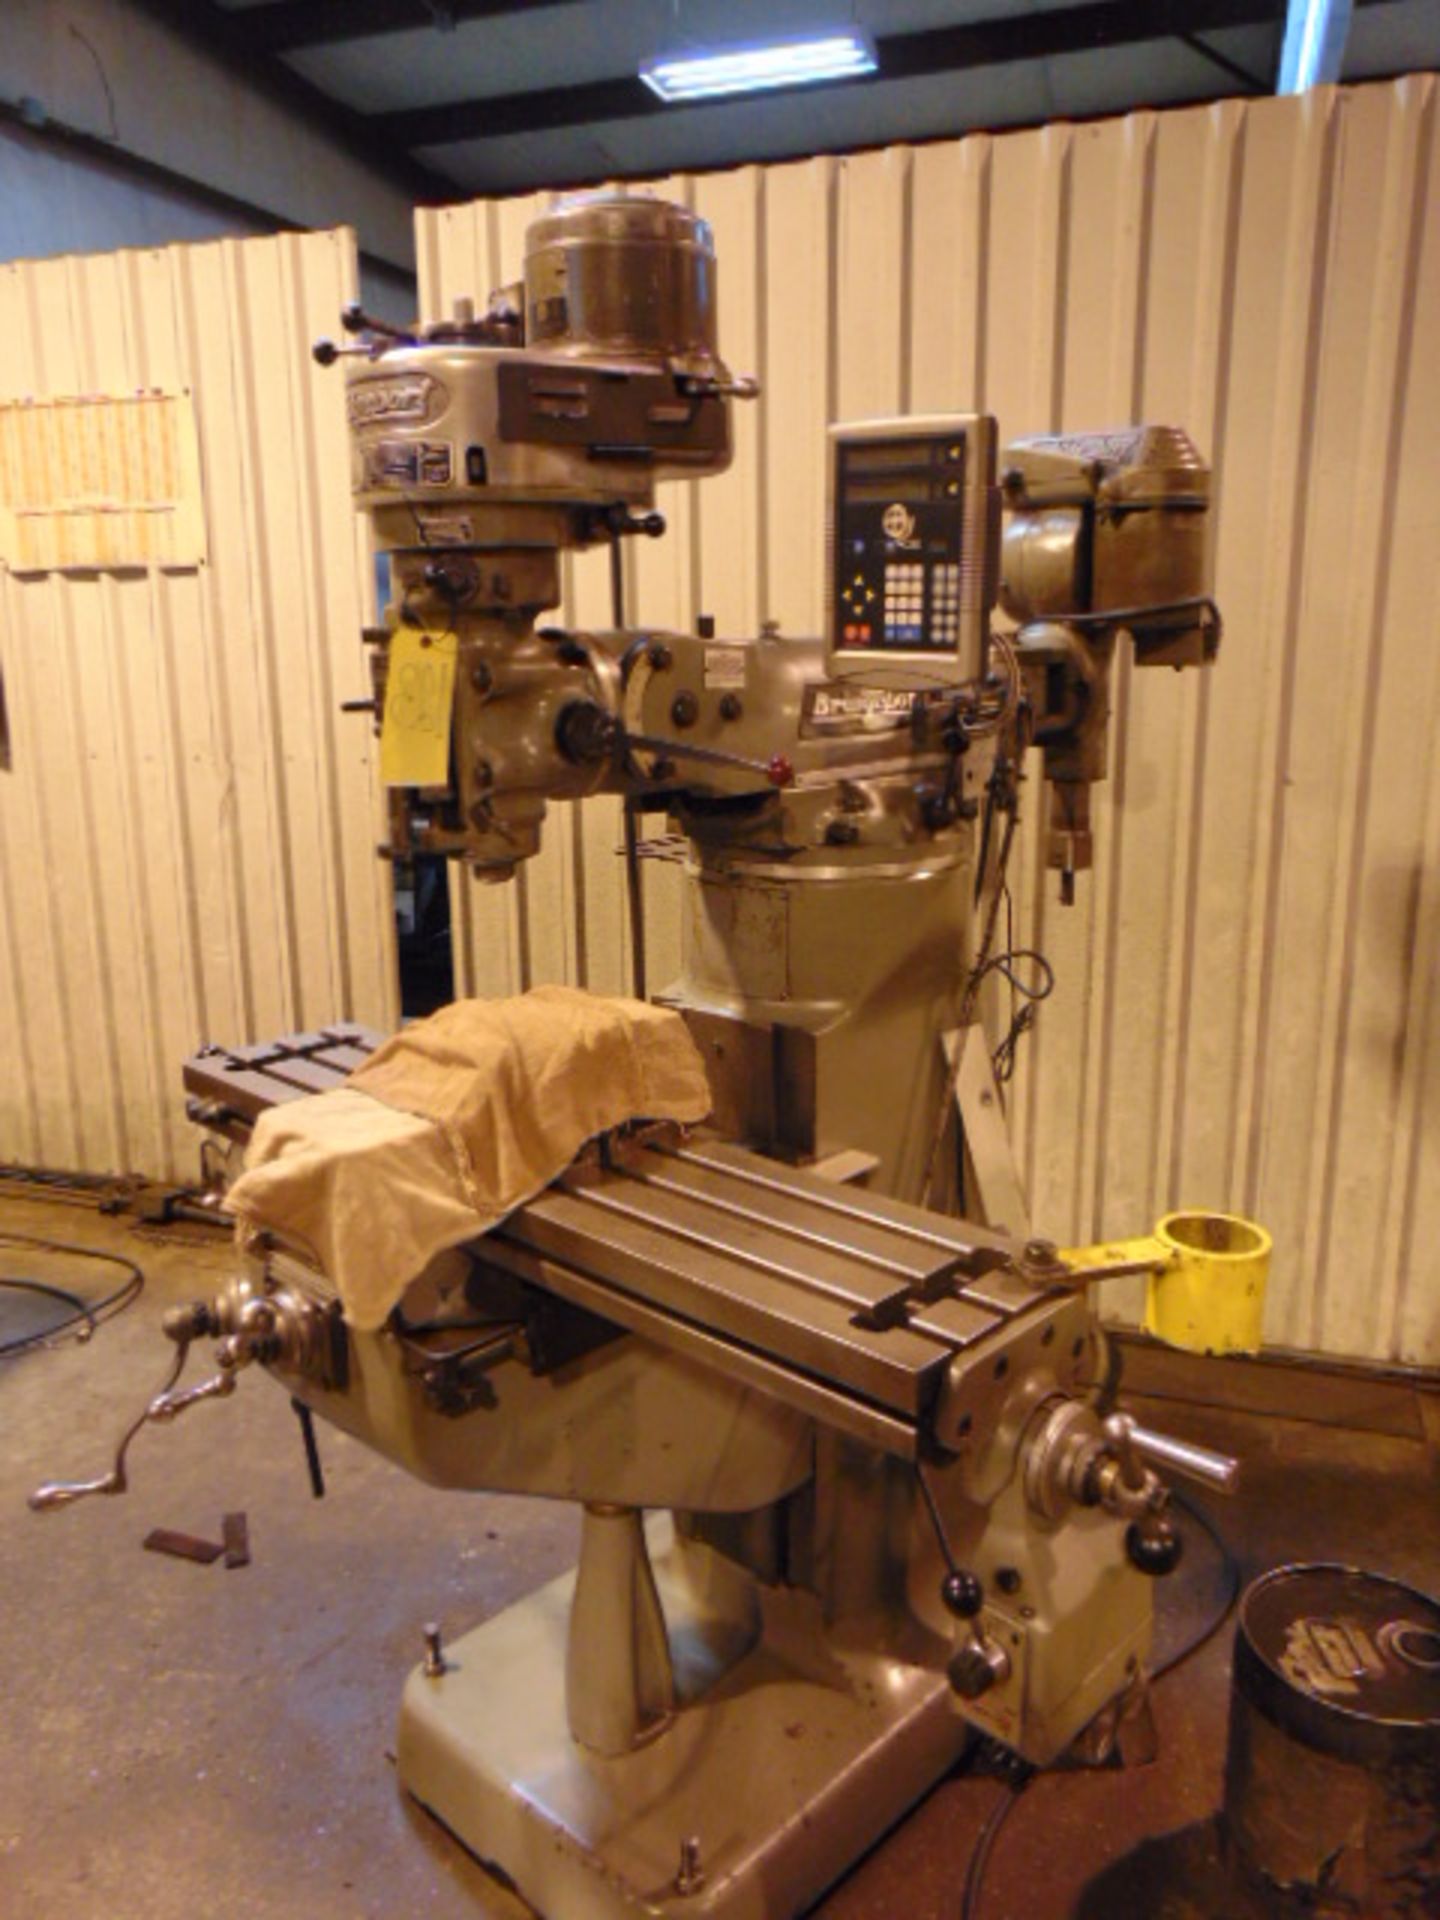 VERTICAL TURRET MILL, BRIDGEPORT J-HEAD, 9” x 42” table, 1 HP step pulley head, Newall 2-axis D.R. - Image 2 of 7